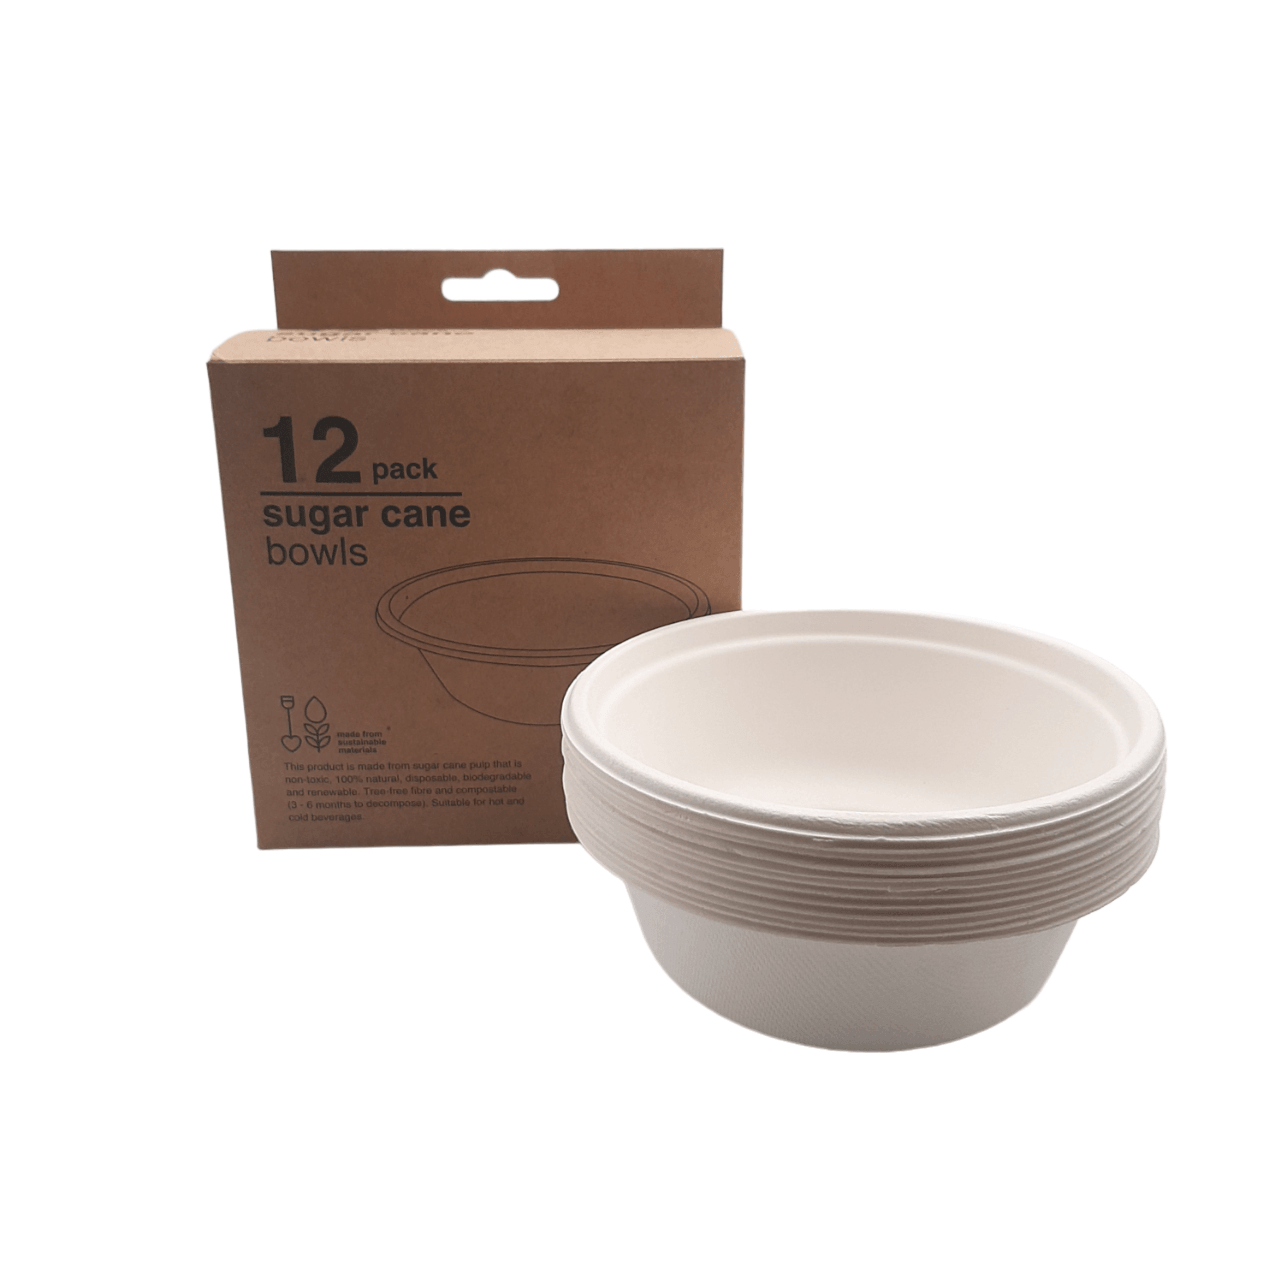 Disposable Biodegradable Dining Set - Home And Trends